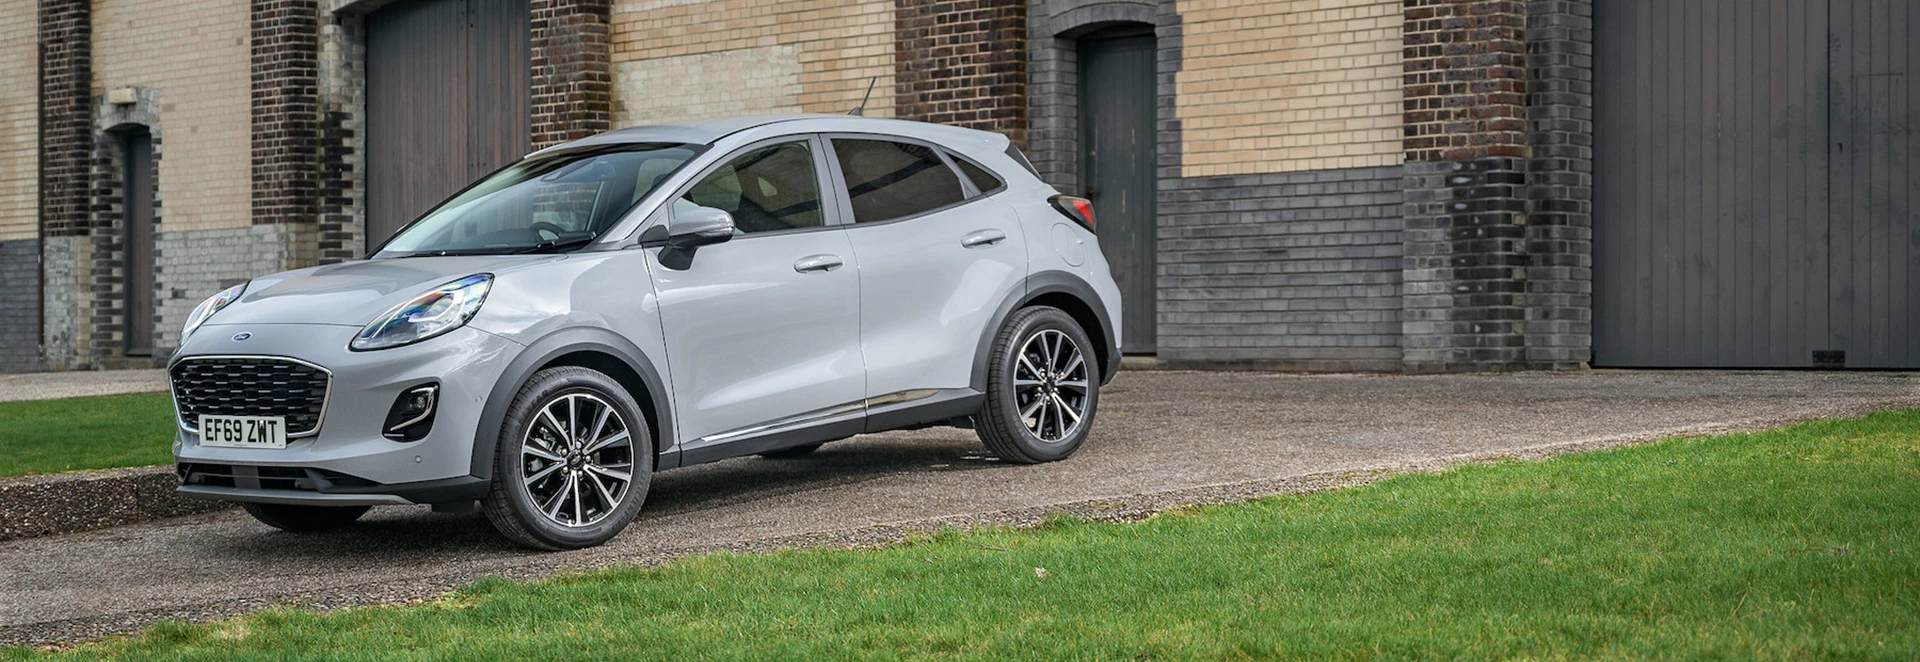 Toezicht houden Acht Ounce Updated: Buyer's guide to the Ford Puma - Car Keys